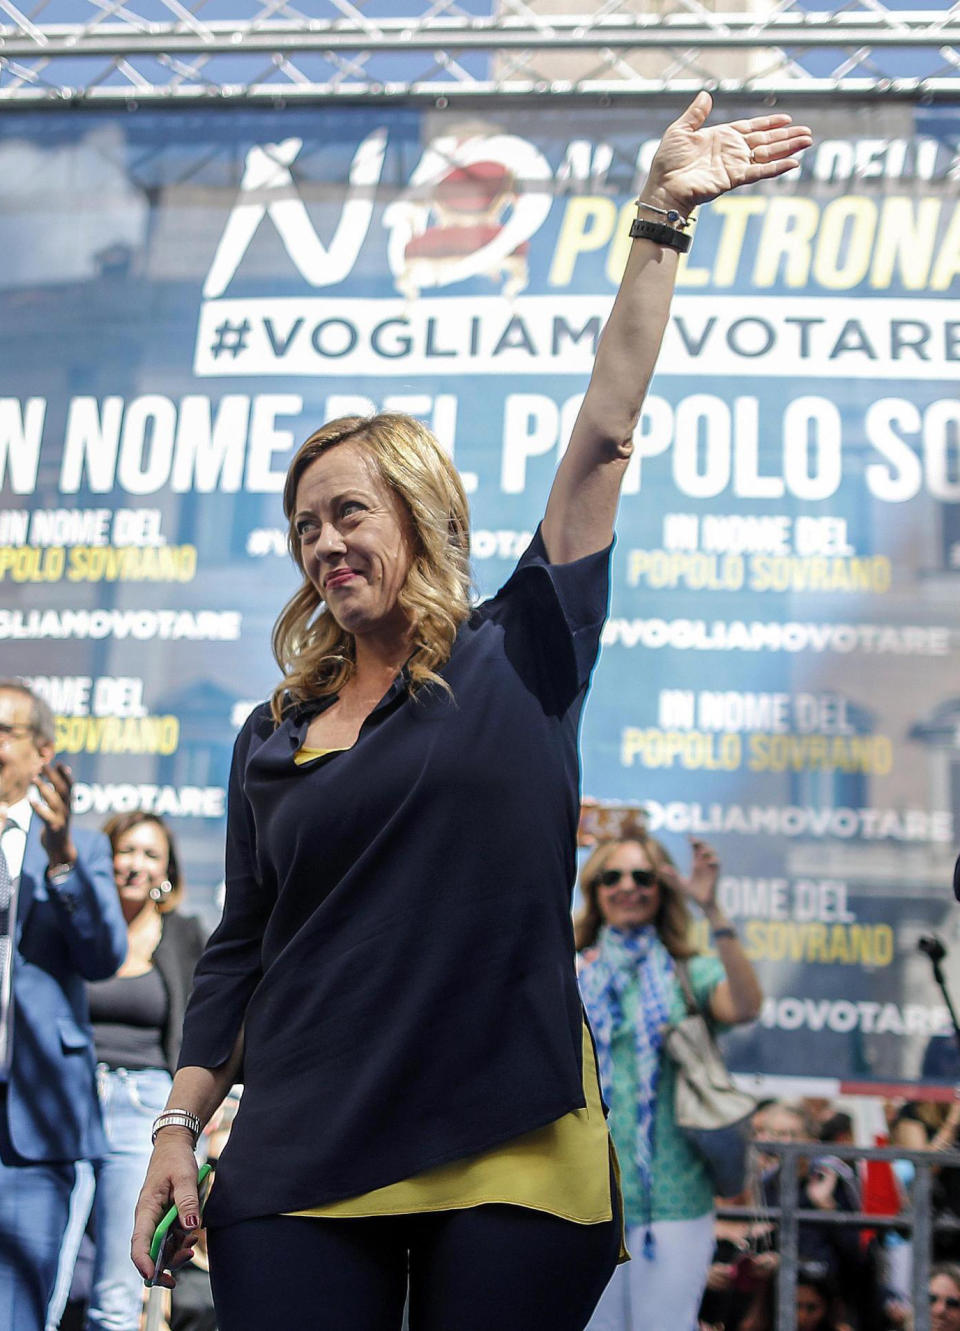 Brothers of Italy right wing party leader Giorgia Meloni waves during a demonstration with the League protesting against the 5-Star and Democratic party coalition government outside the Lower Chamber, in Rome, Monday, Sept. 9, 2019. Conte is pitching for support in Parliament for his new left-leaning coalition ahead of crucial confidence votes and the lower Chamber of Deputies, where the government has a comfortable majority, is set to vote Monday evening. (Riccardo Antimiani/ANSA via AP)